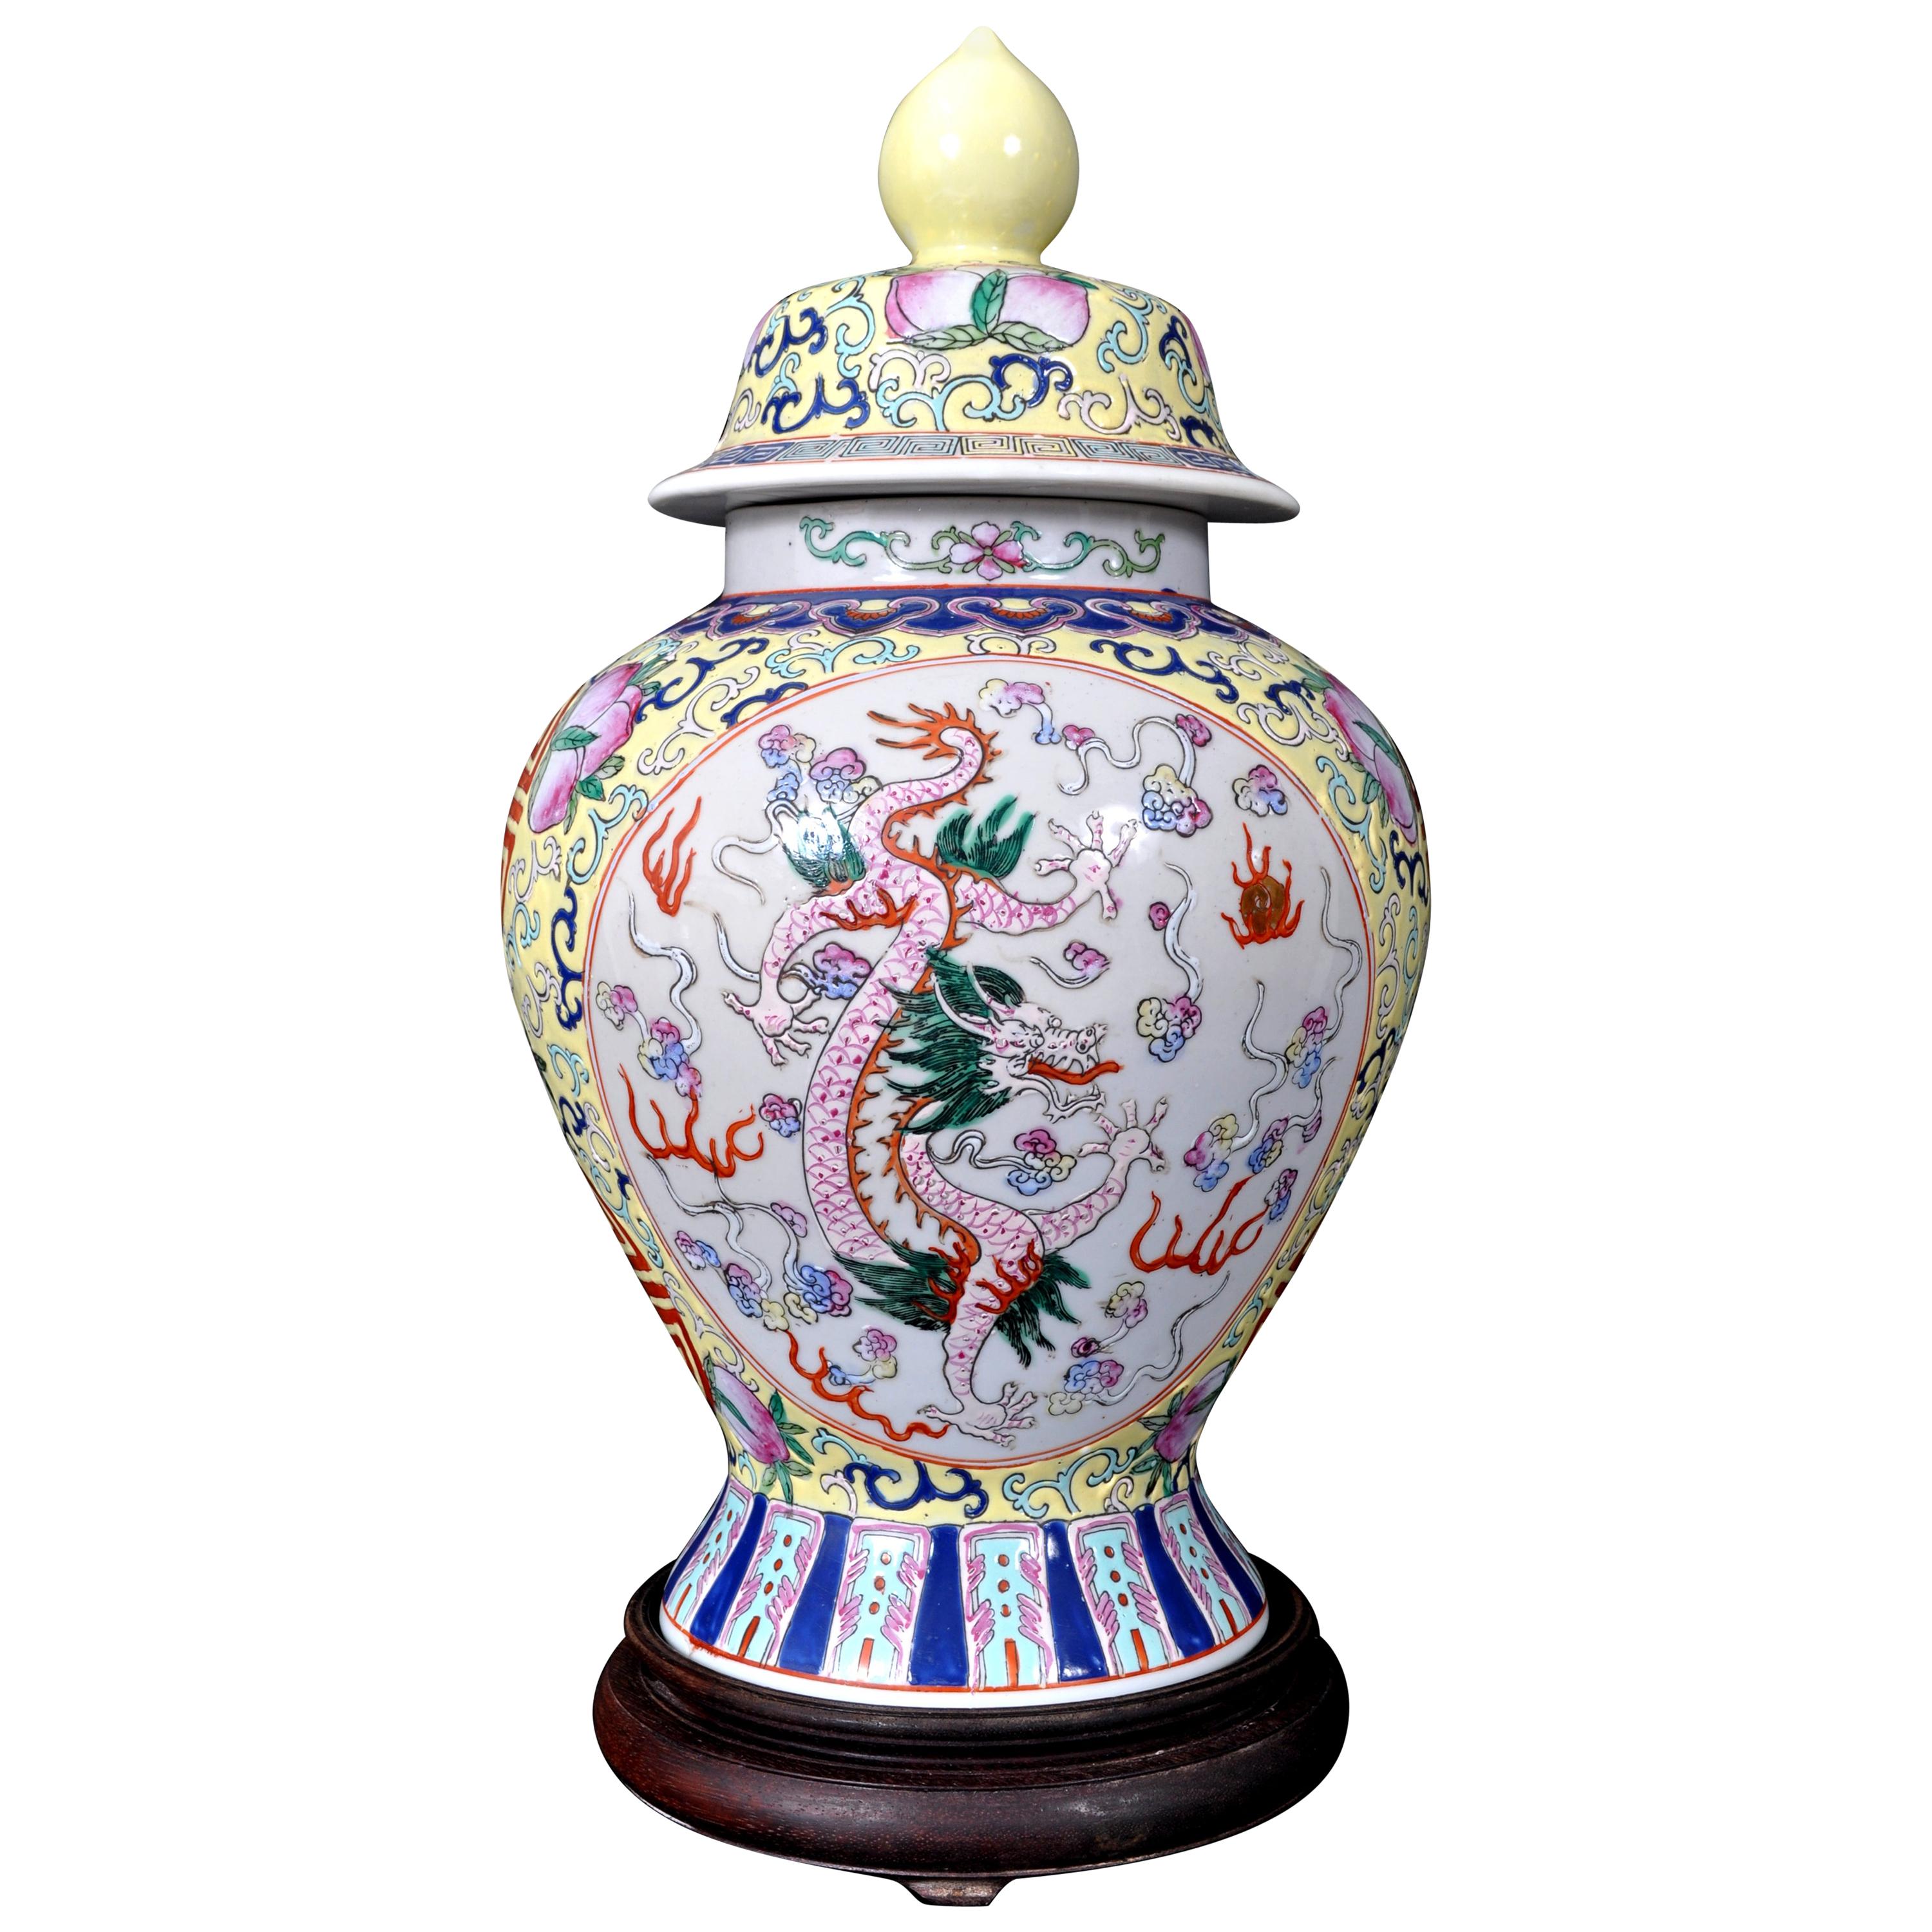 19th Century Chinese Qing Dynasty Imperial Porcelain Lidded Ginger Jar, 1880